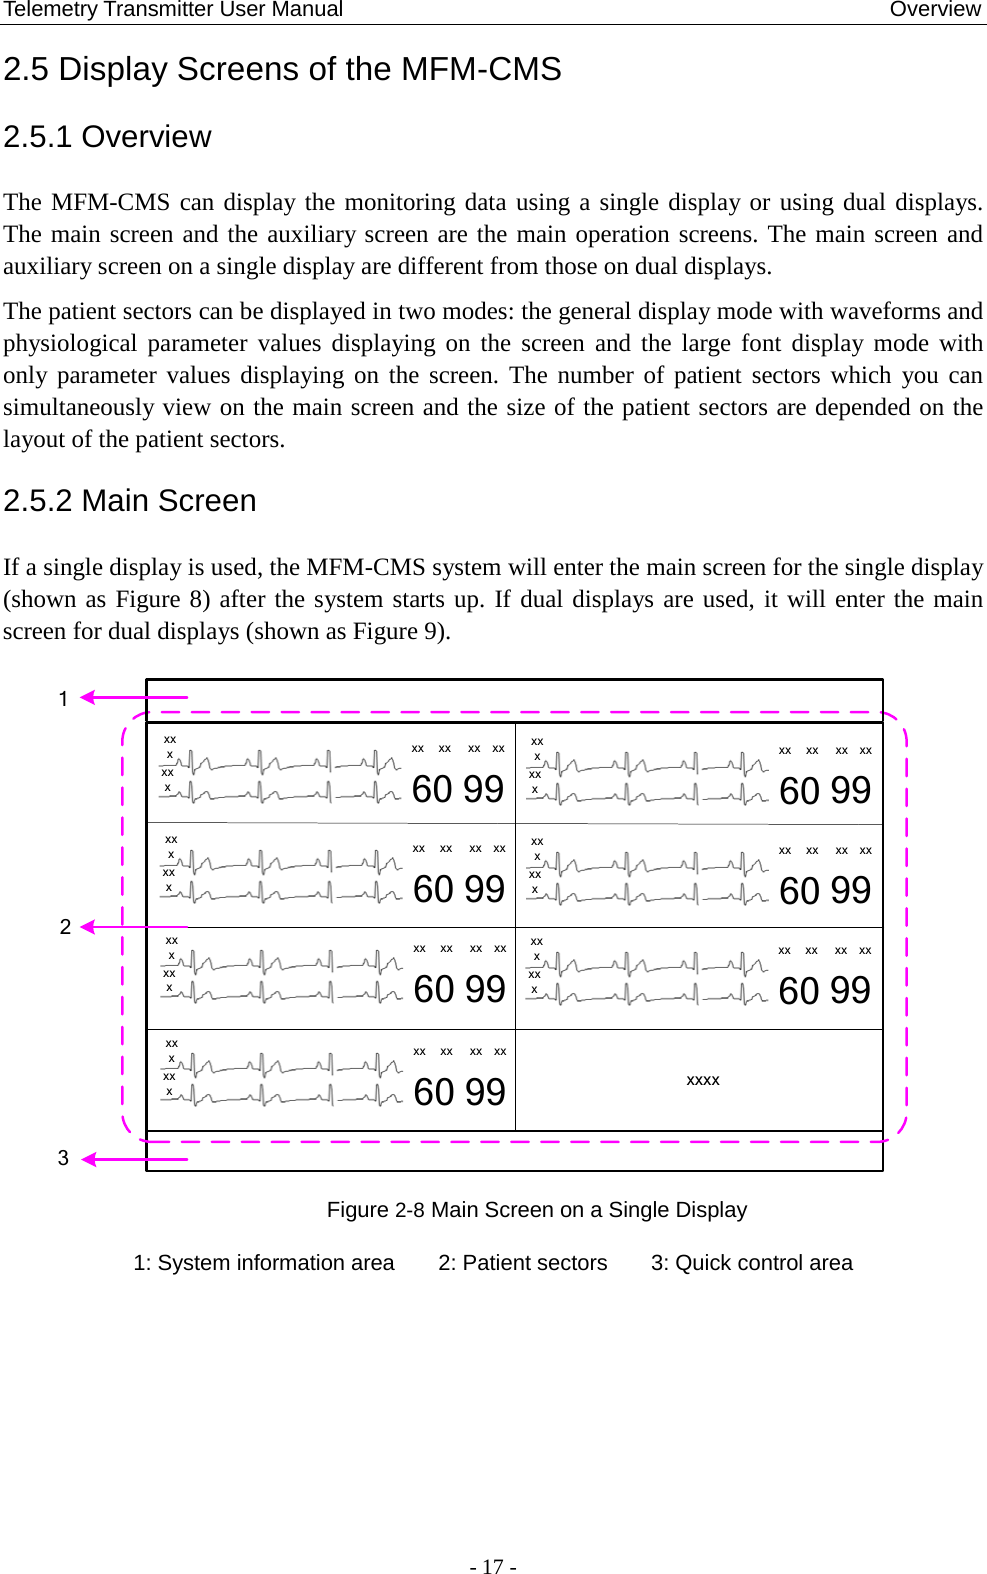 Telemetry Transmitter User Manual                                                  Overview 2.5 Display Screens of the MFM-CMS   2.5.1 Overview The MFM-CMS can display the monitoring data using a single display or using dual displays. The main screen and the auxiliary screen are the main operation screens. The main screen and auxiliary screen on a single display are different from those on dual displays. The patient sectors can be displayed in two modes: the general display mode with waveforms and physiological parameter values displaying on the screen and the large font display mode with only parameter values displaying on the screen. The number of patient sectors which you can simultaneously view on the main screen and the size of the patient sectors are depended on the layout of the patient sectors.   2.5.2 Main Screen If a single display is used, the MFM-CMS system will enter the main screen for the single display (shown as Figure 8) after the system starts up. If dual displays are used, it will enter the main screen for dual displays (shown as Figure 9). xxxxxxxx xx xx xx60 99xxxxxxxx xx xx xx60 99xxxxxxxx xx xx xx60 99xxxxxxxx xx xx xx60 99xxxxxxxx xx xx xx60 99xxxxxxxx xx xx xx60 99xxxxxxxx xx xx xx60 99132xxxx Figure 2-8 Main Screen on a Single Display  1: System information area        2: Patient sectors        3: Quick control area  - 17 - 